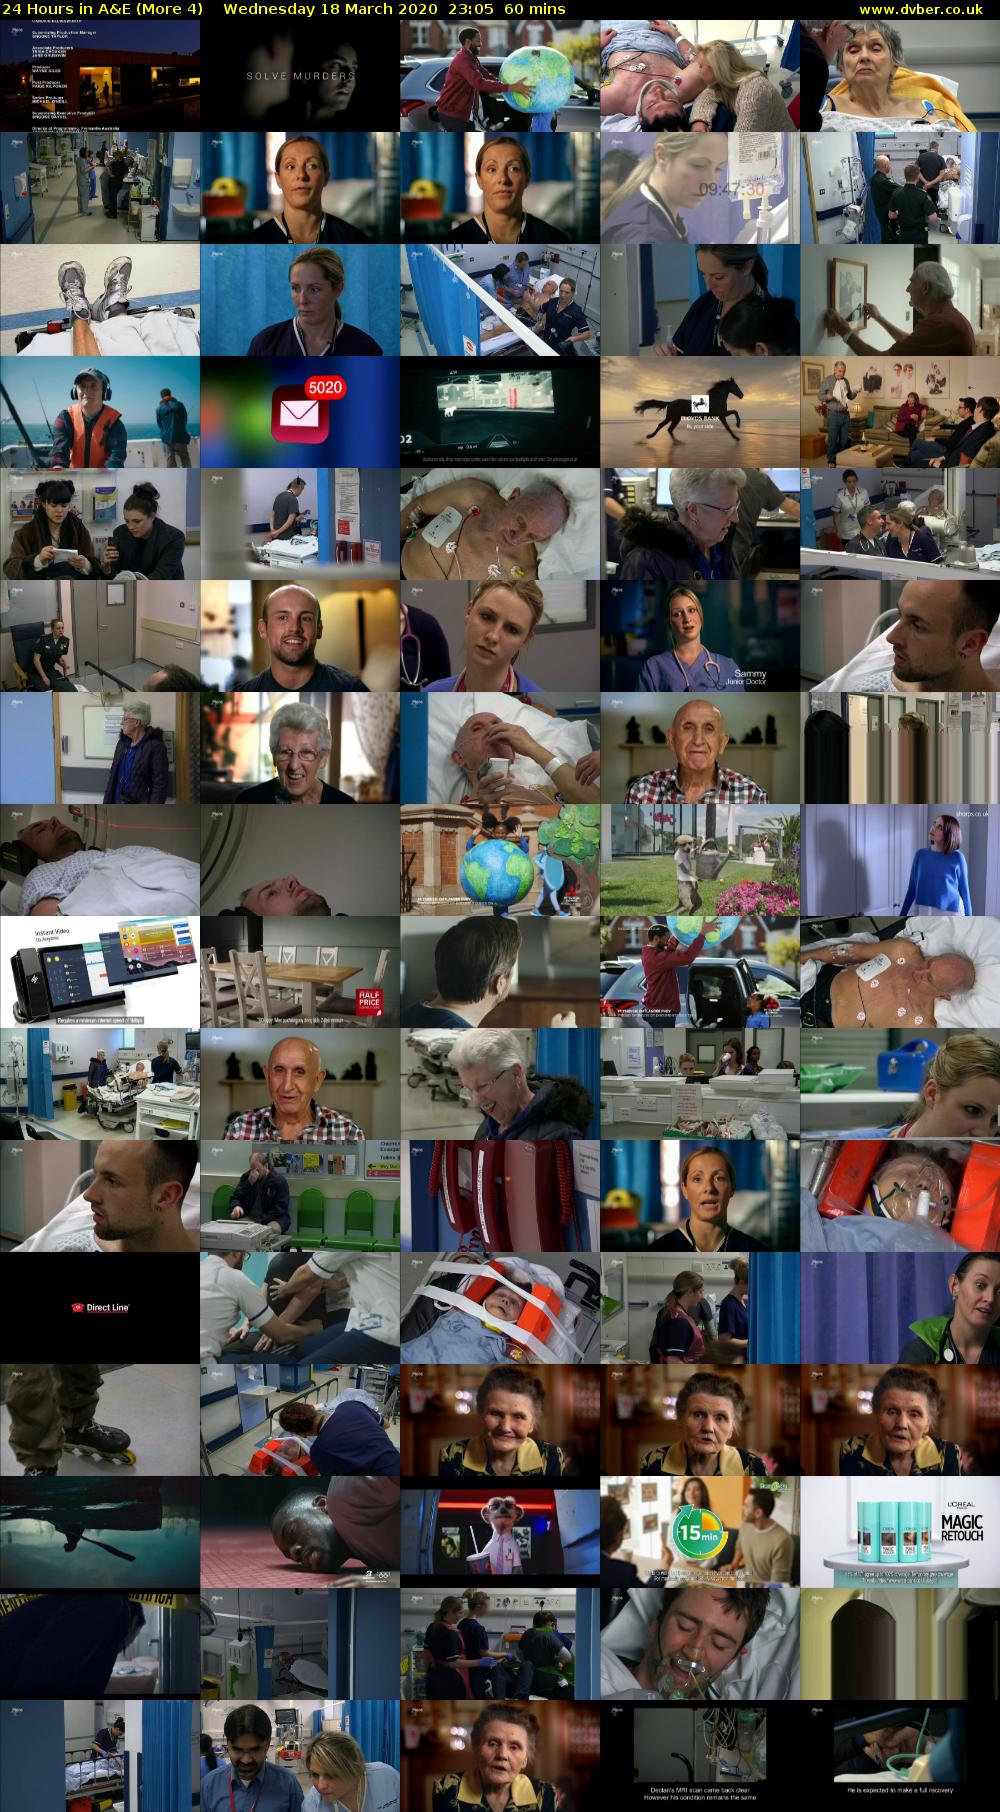 24 Hours in A&E (More 4) Wednesday 18 March 2020 23:05 - 00:05